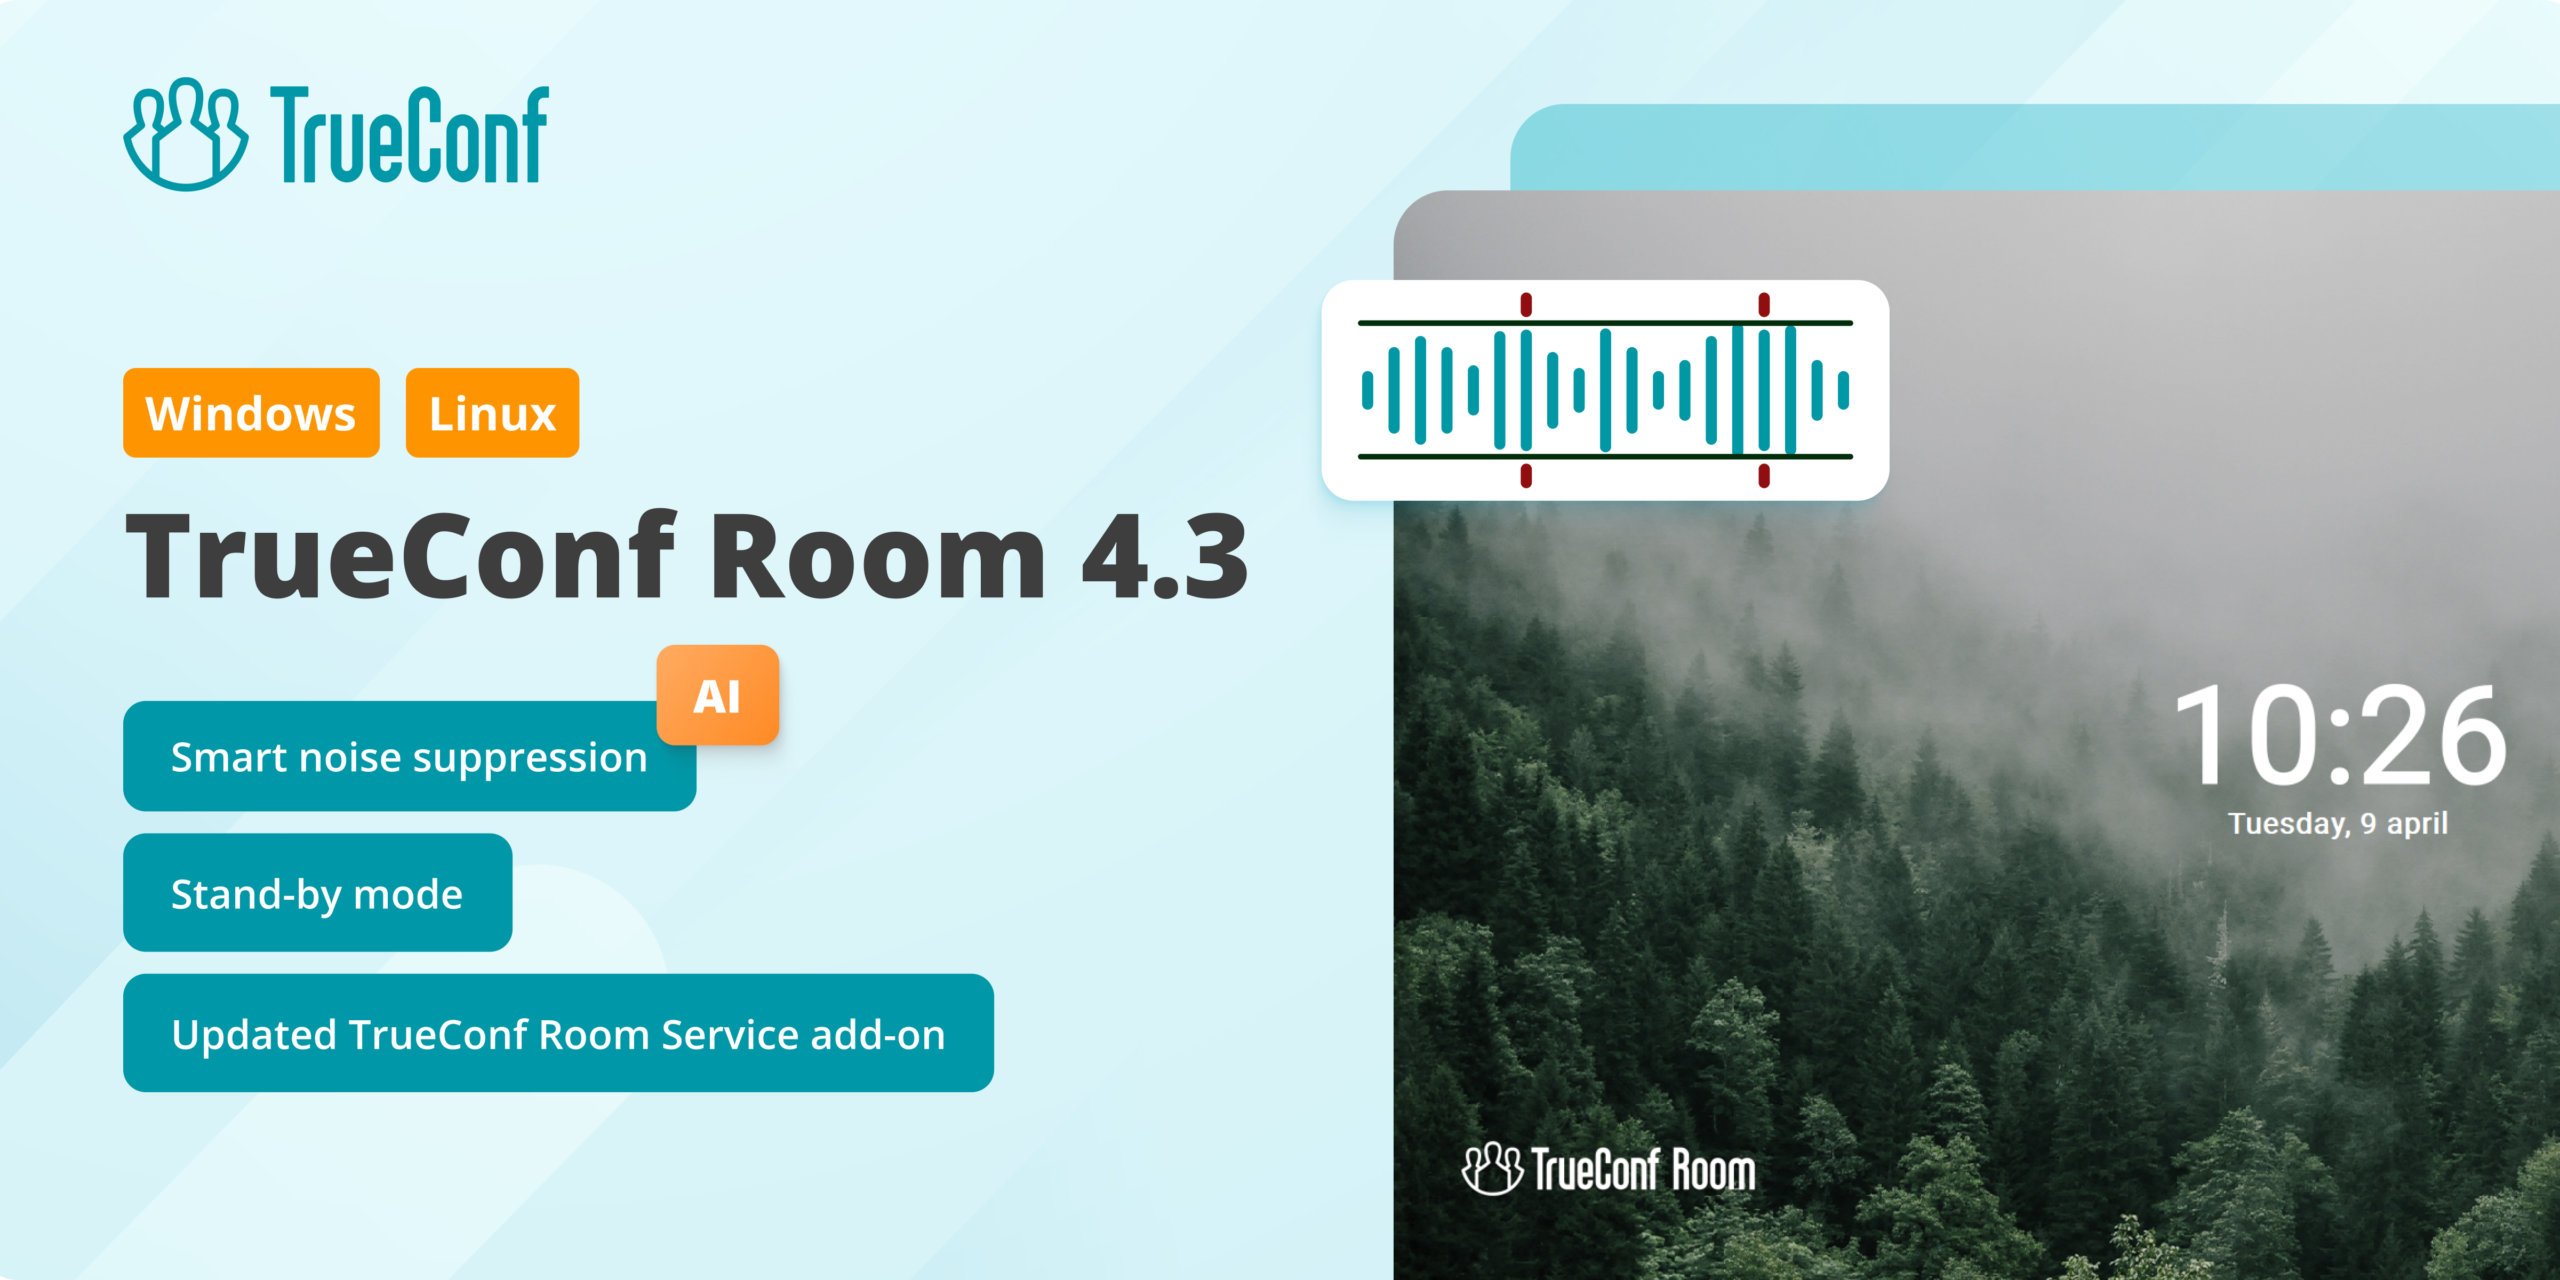 TrueConf Room 4.3: Smart noise suppression and stand-by mode 94